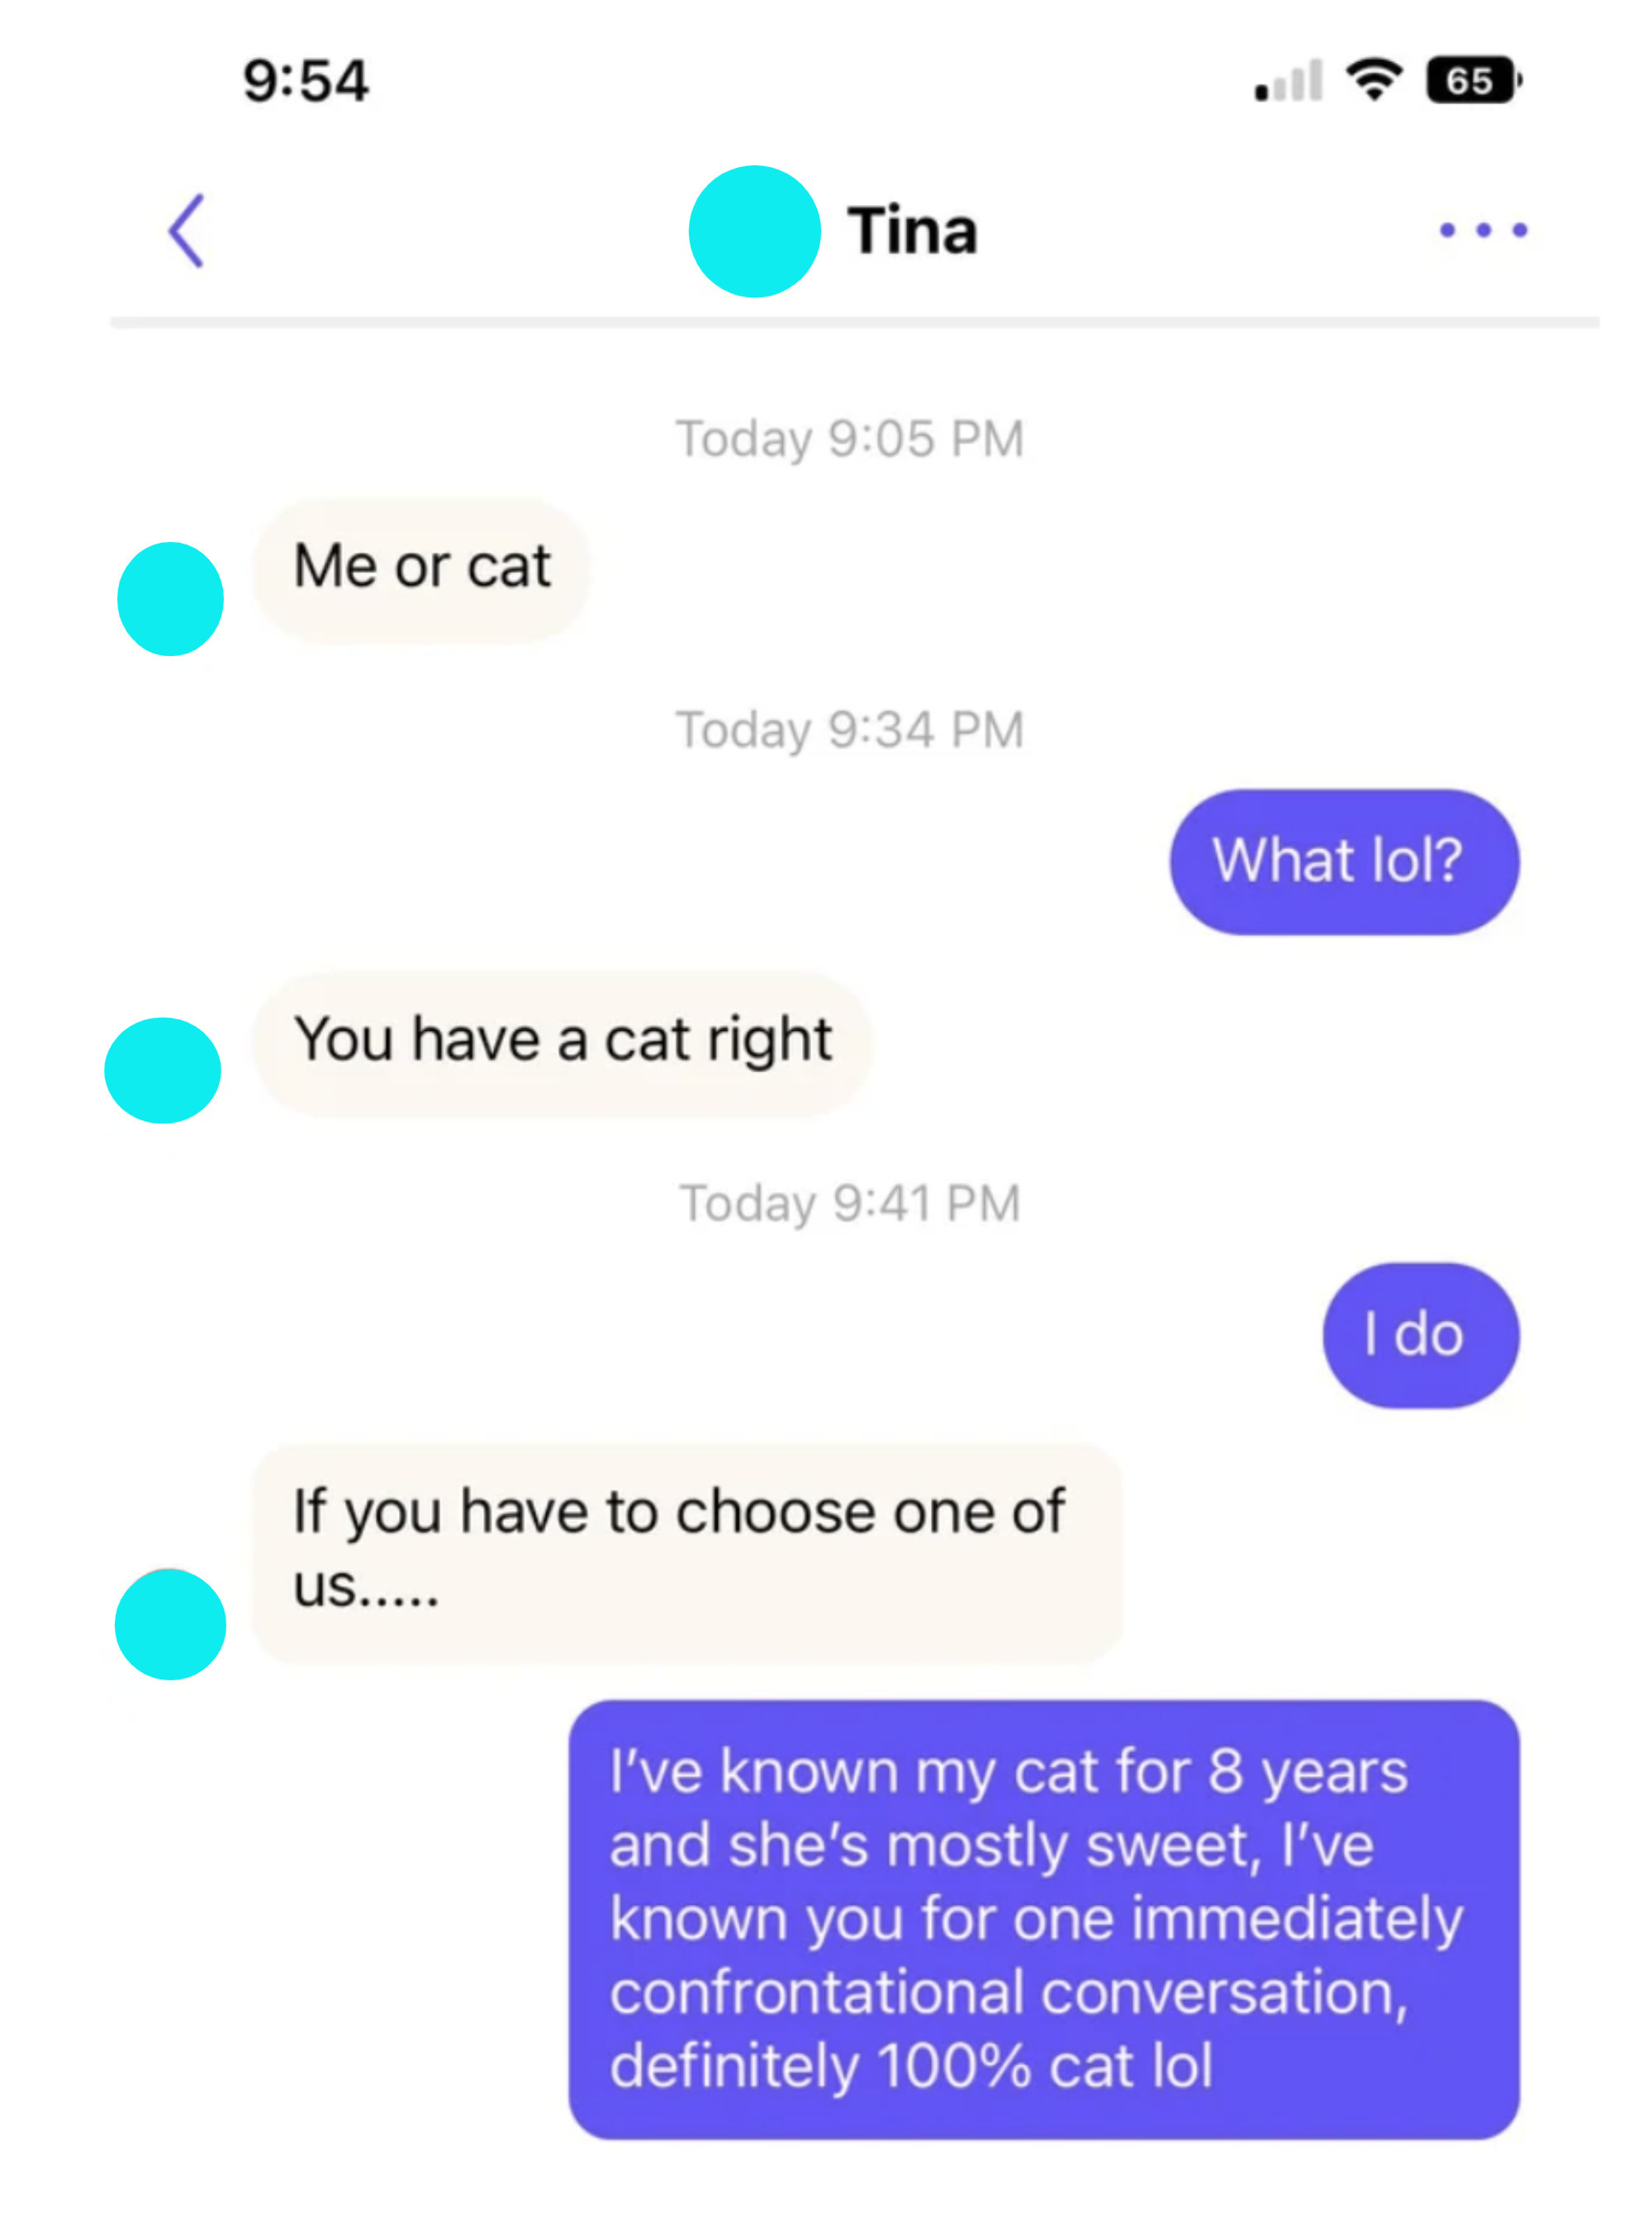 person saying they&#x27;ve known their cat for 8 years, so they&#x27;ll pick it over a stranger